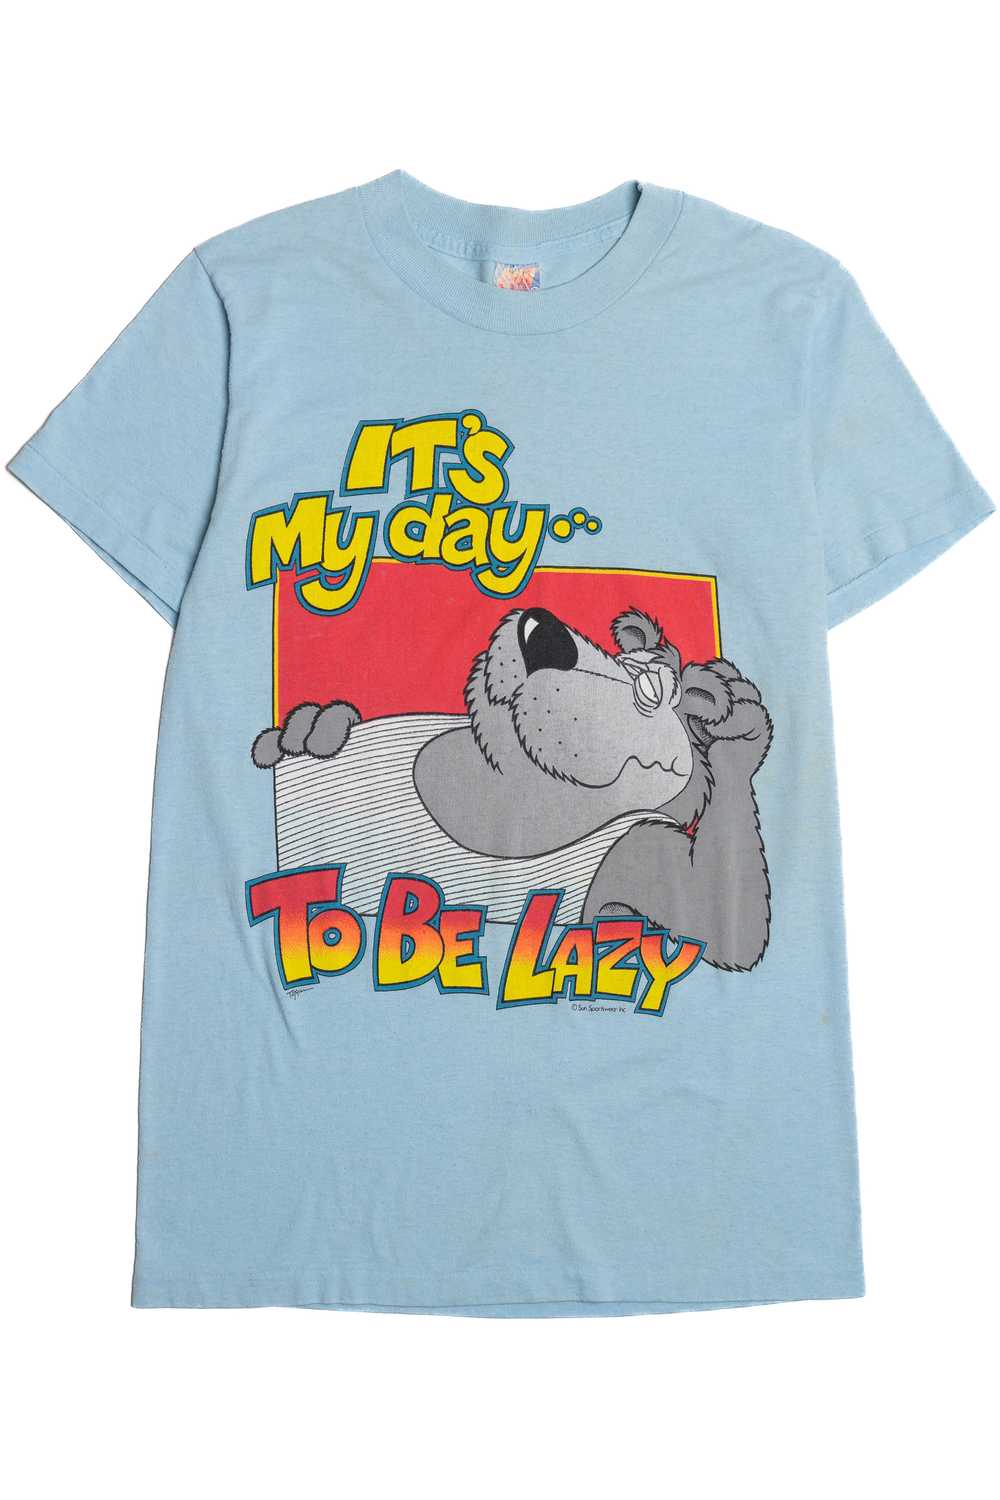 Vintage "It's My Day... To Be Lazy" T-Shirt - image 1